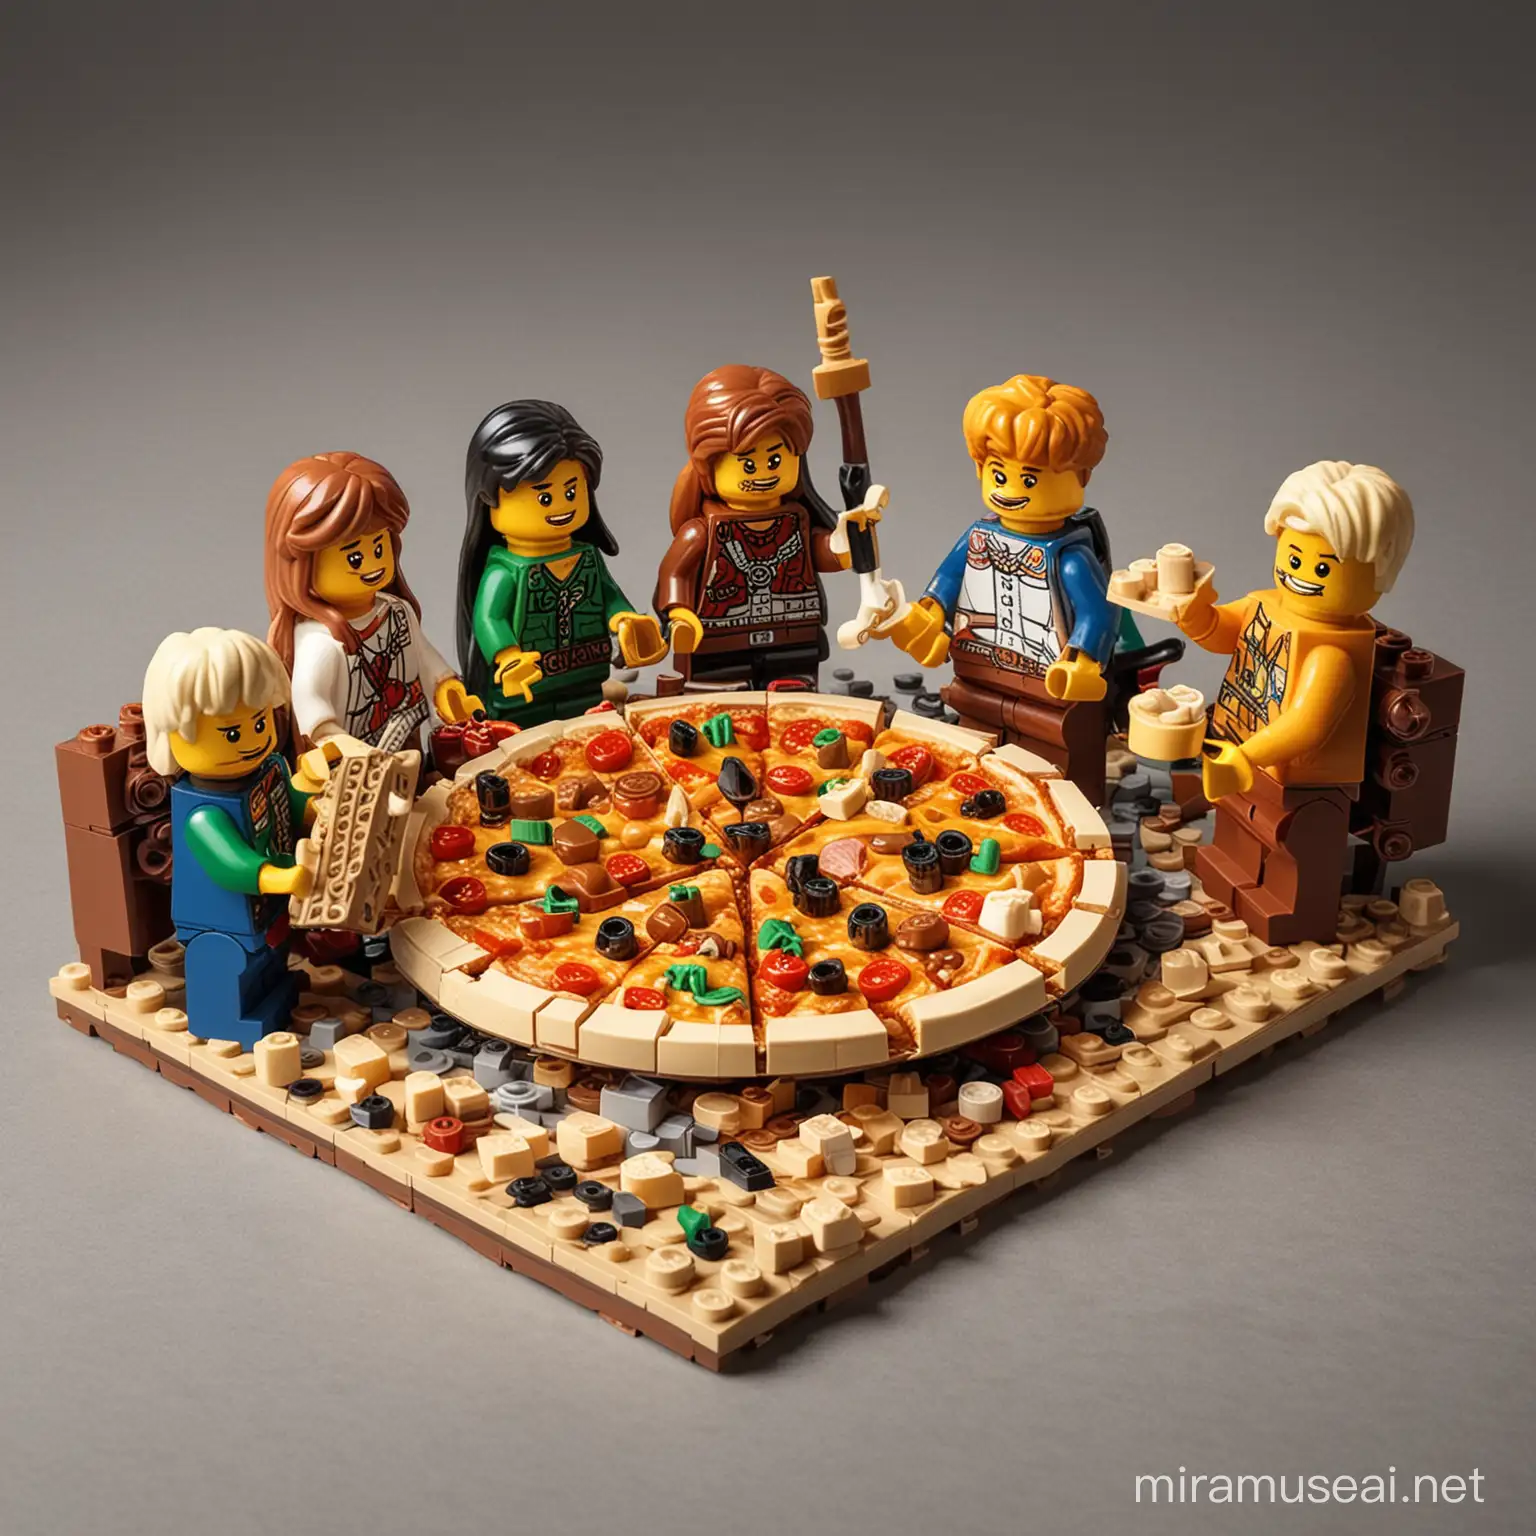 There is a musical group. The member of group are lego characters. They are eating a pizza. The pizza is made by lego pieces. 